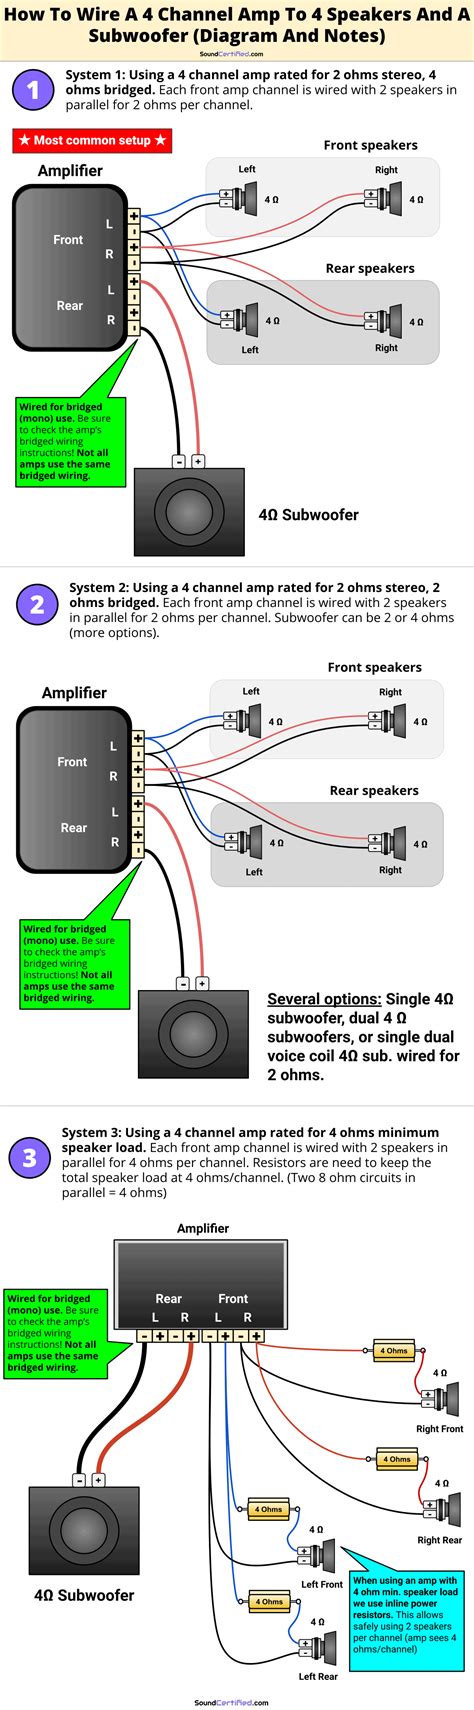 This article described in detail, the guide involved on how to wire subwoofers in a car. How To Wire A 4 Channel Amp To 4 Speakers And A Sub: A Detailed Guide With Diagrams